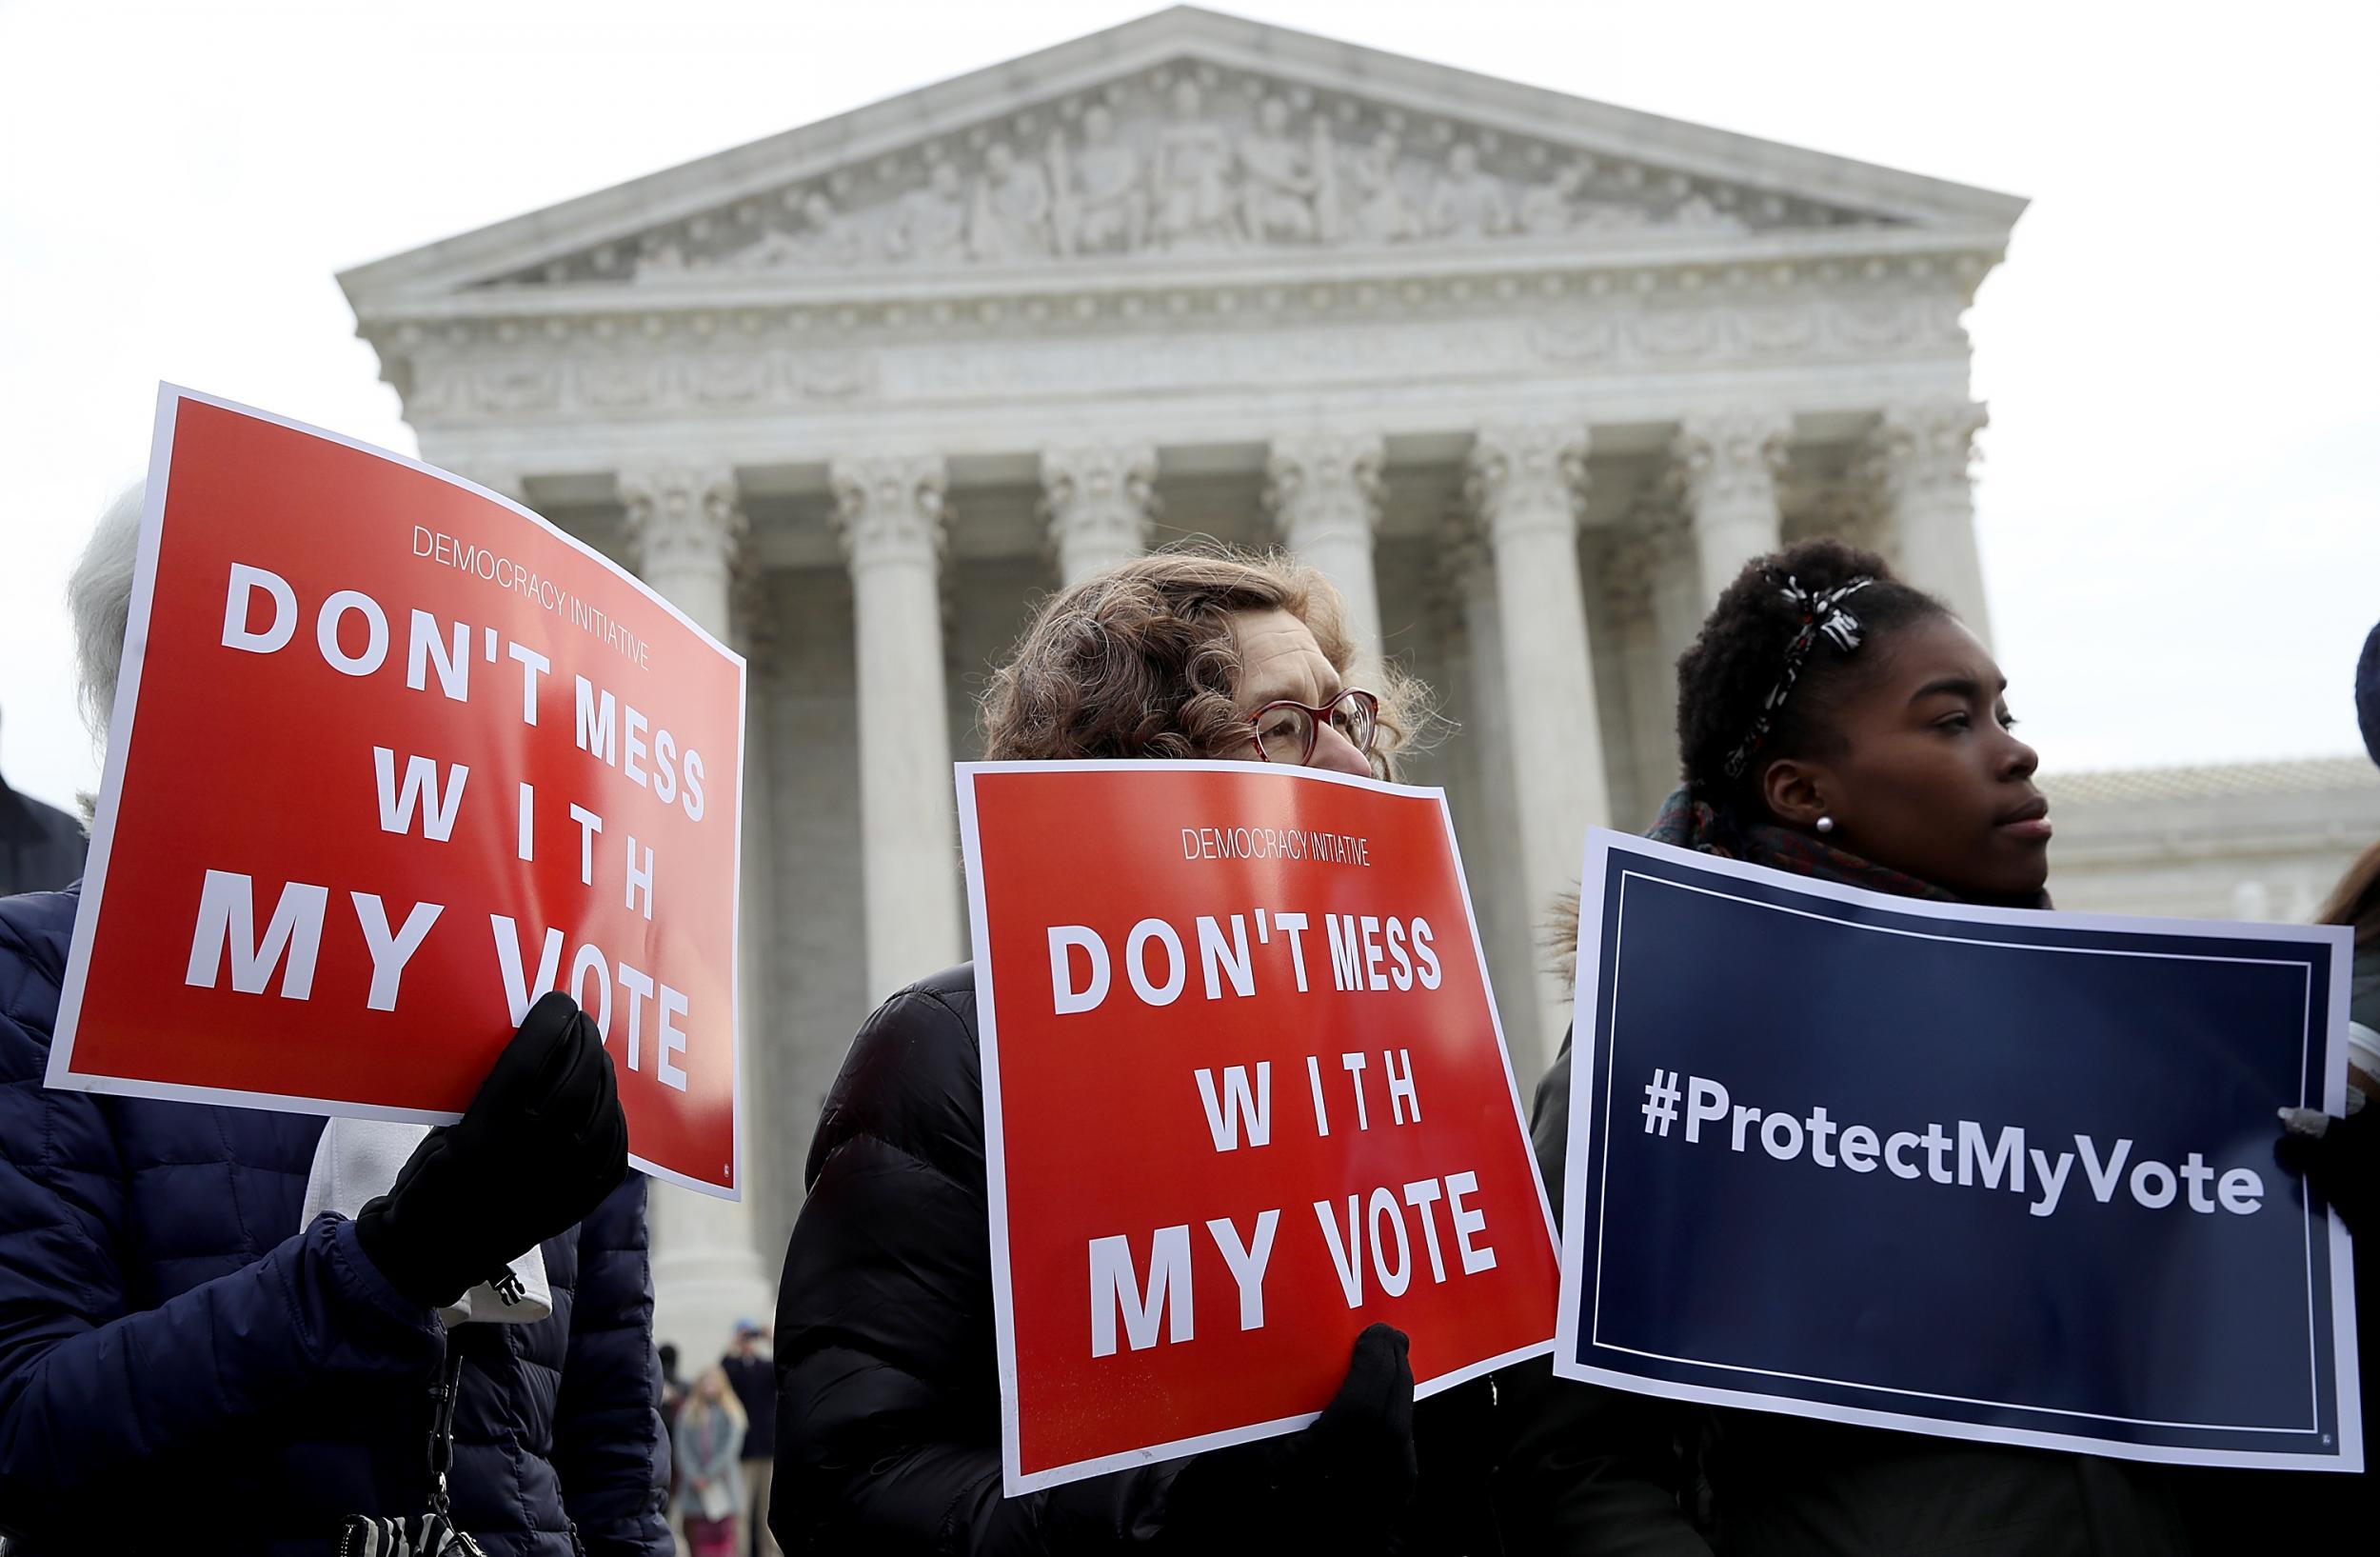 Protesters gather during a rally held by the group Common Cause in front of the US Supreme Court